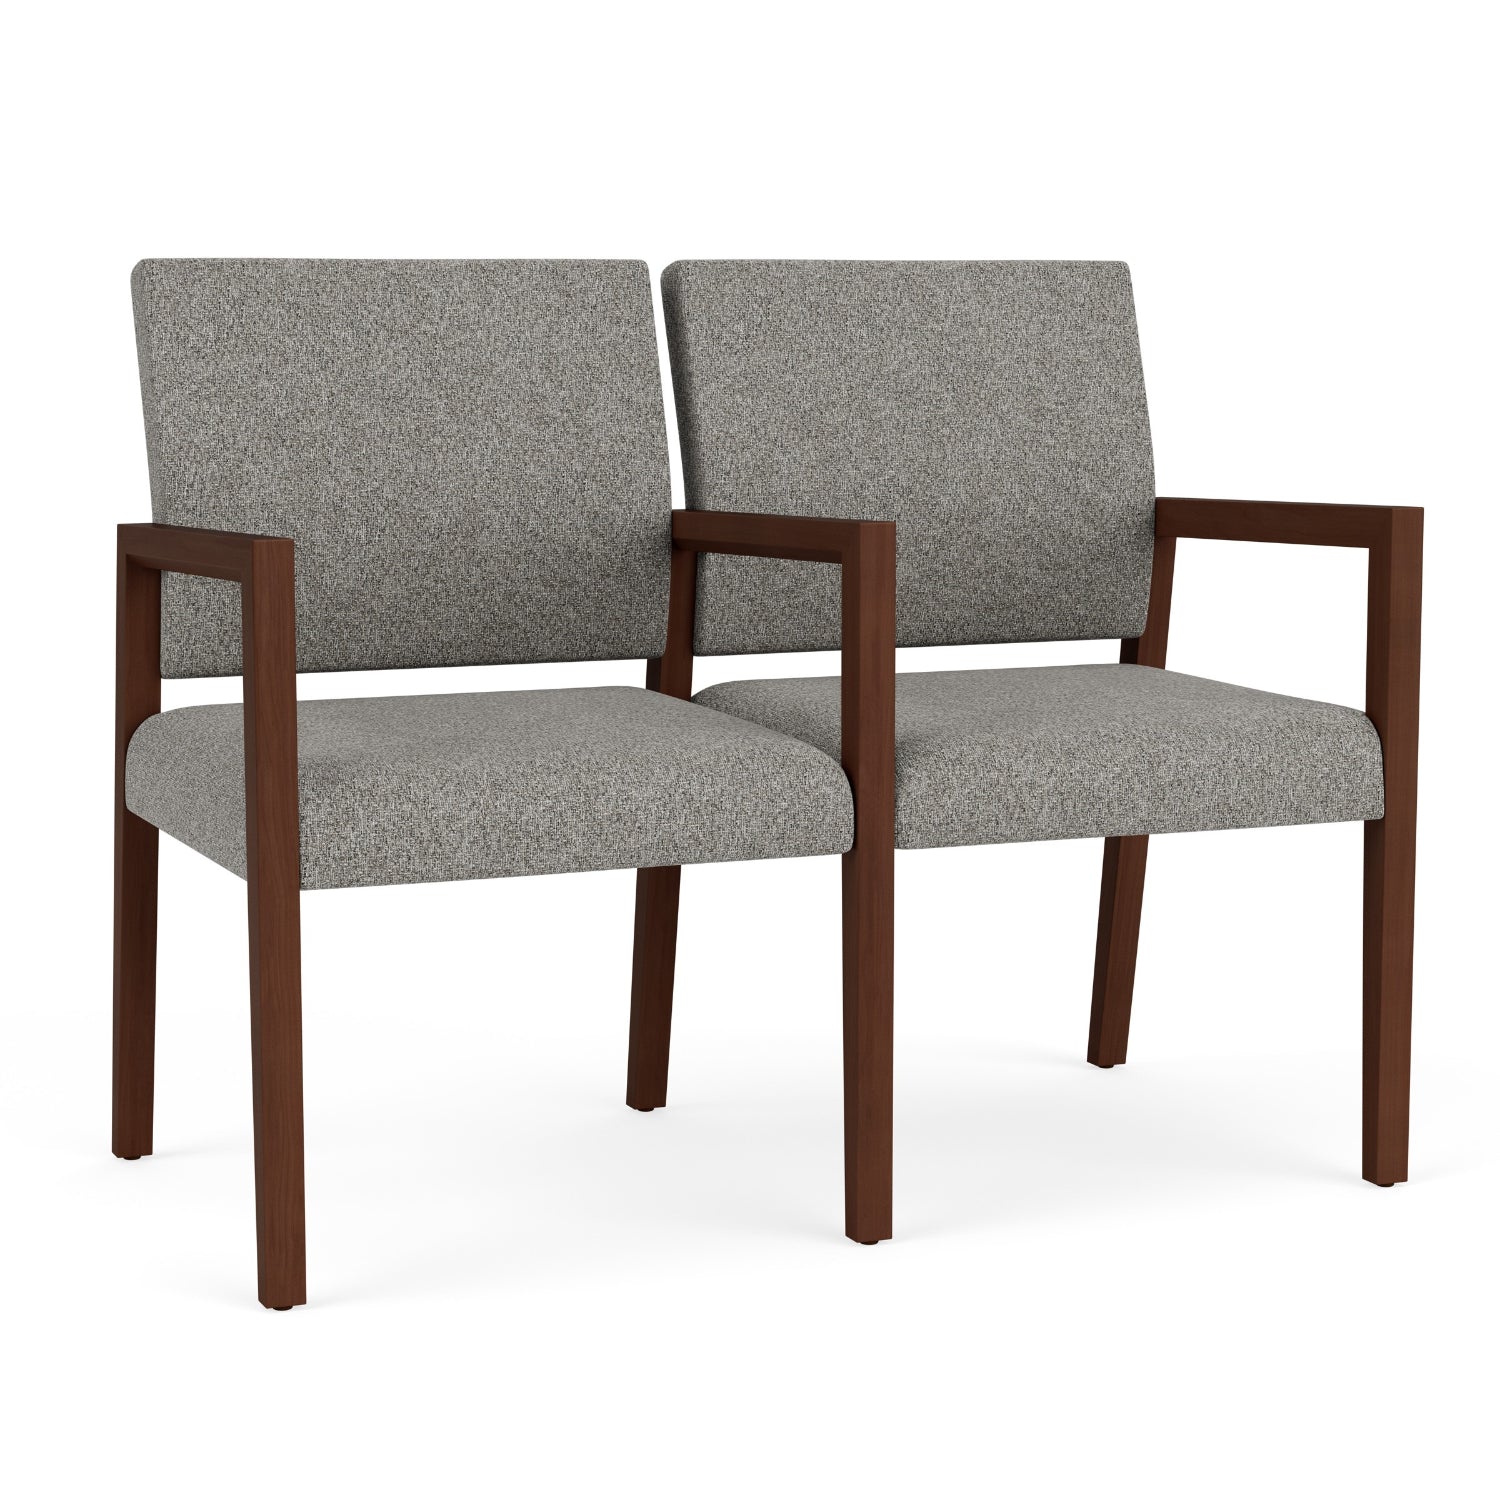 Brooklyn Collection Reception Seating, 2 Seats with Center Arm, Standard Fabric Upholstery, FREE SHIPPING